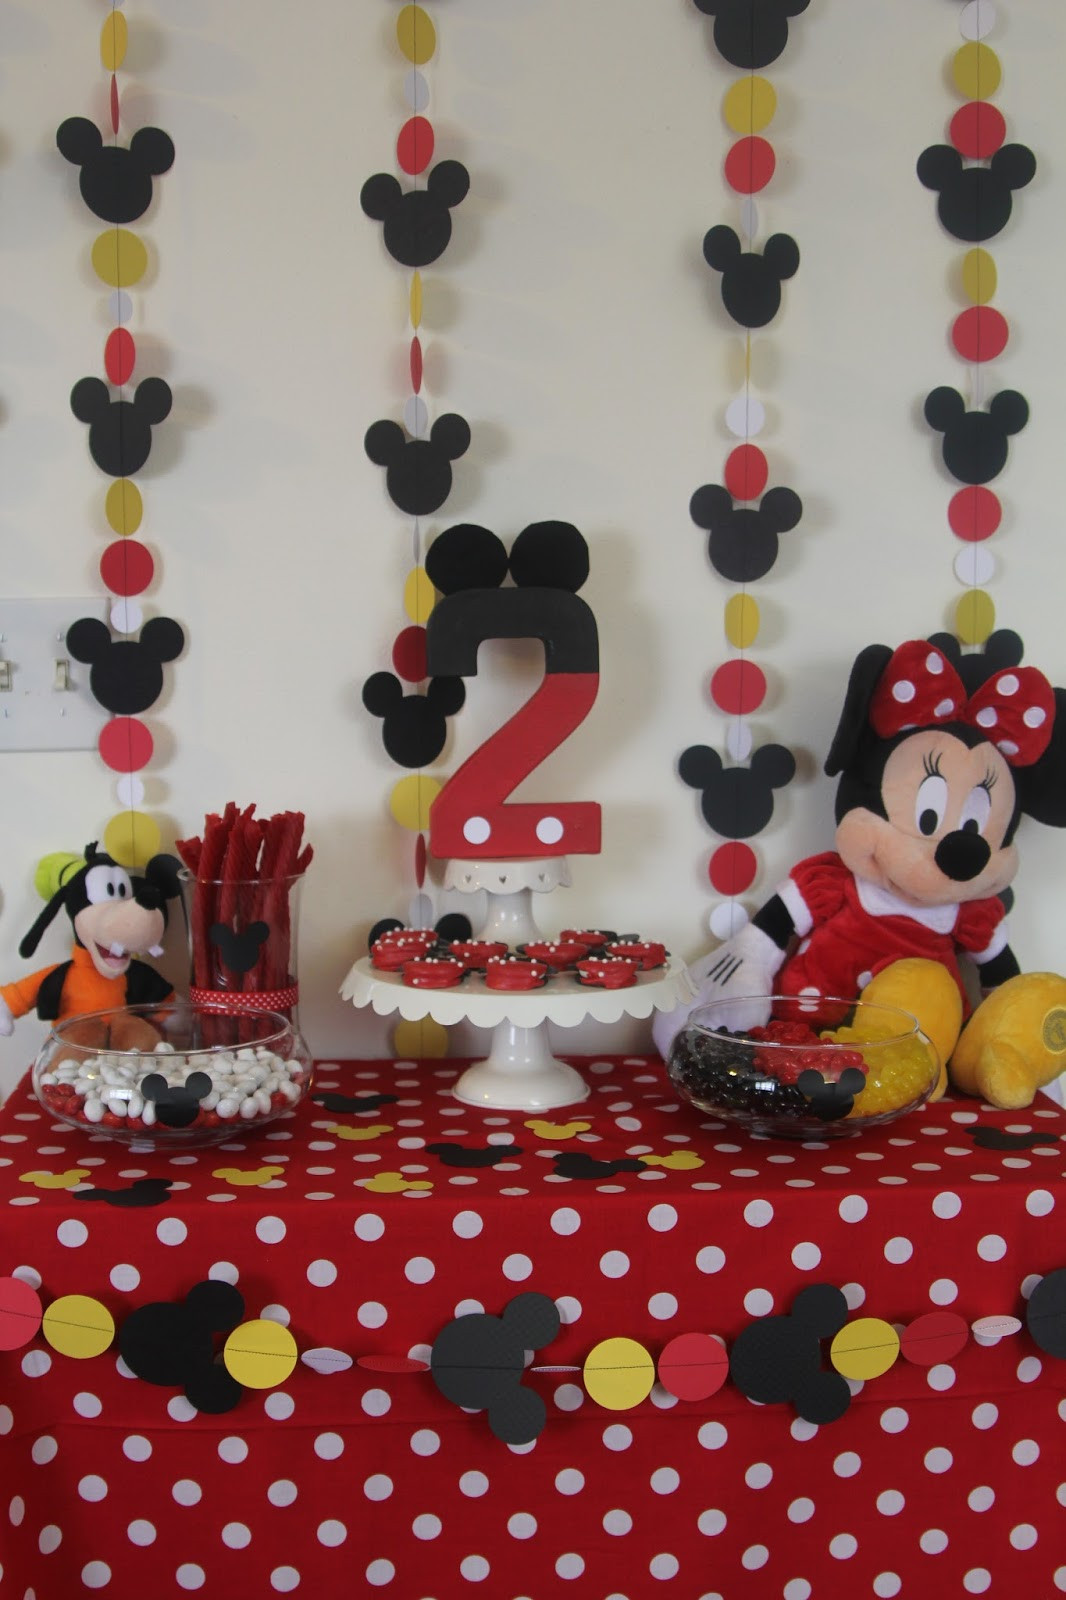 Minnie Mouse Birthday Party Decoration Ideas
 Decorating the Dorchester Way Simple Red Minnie Mouse